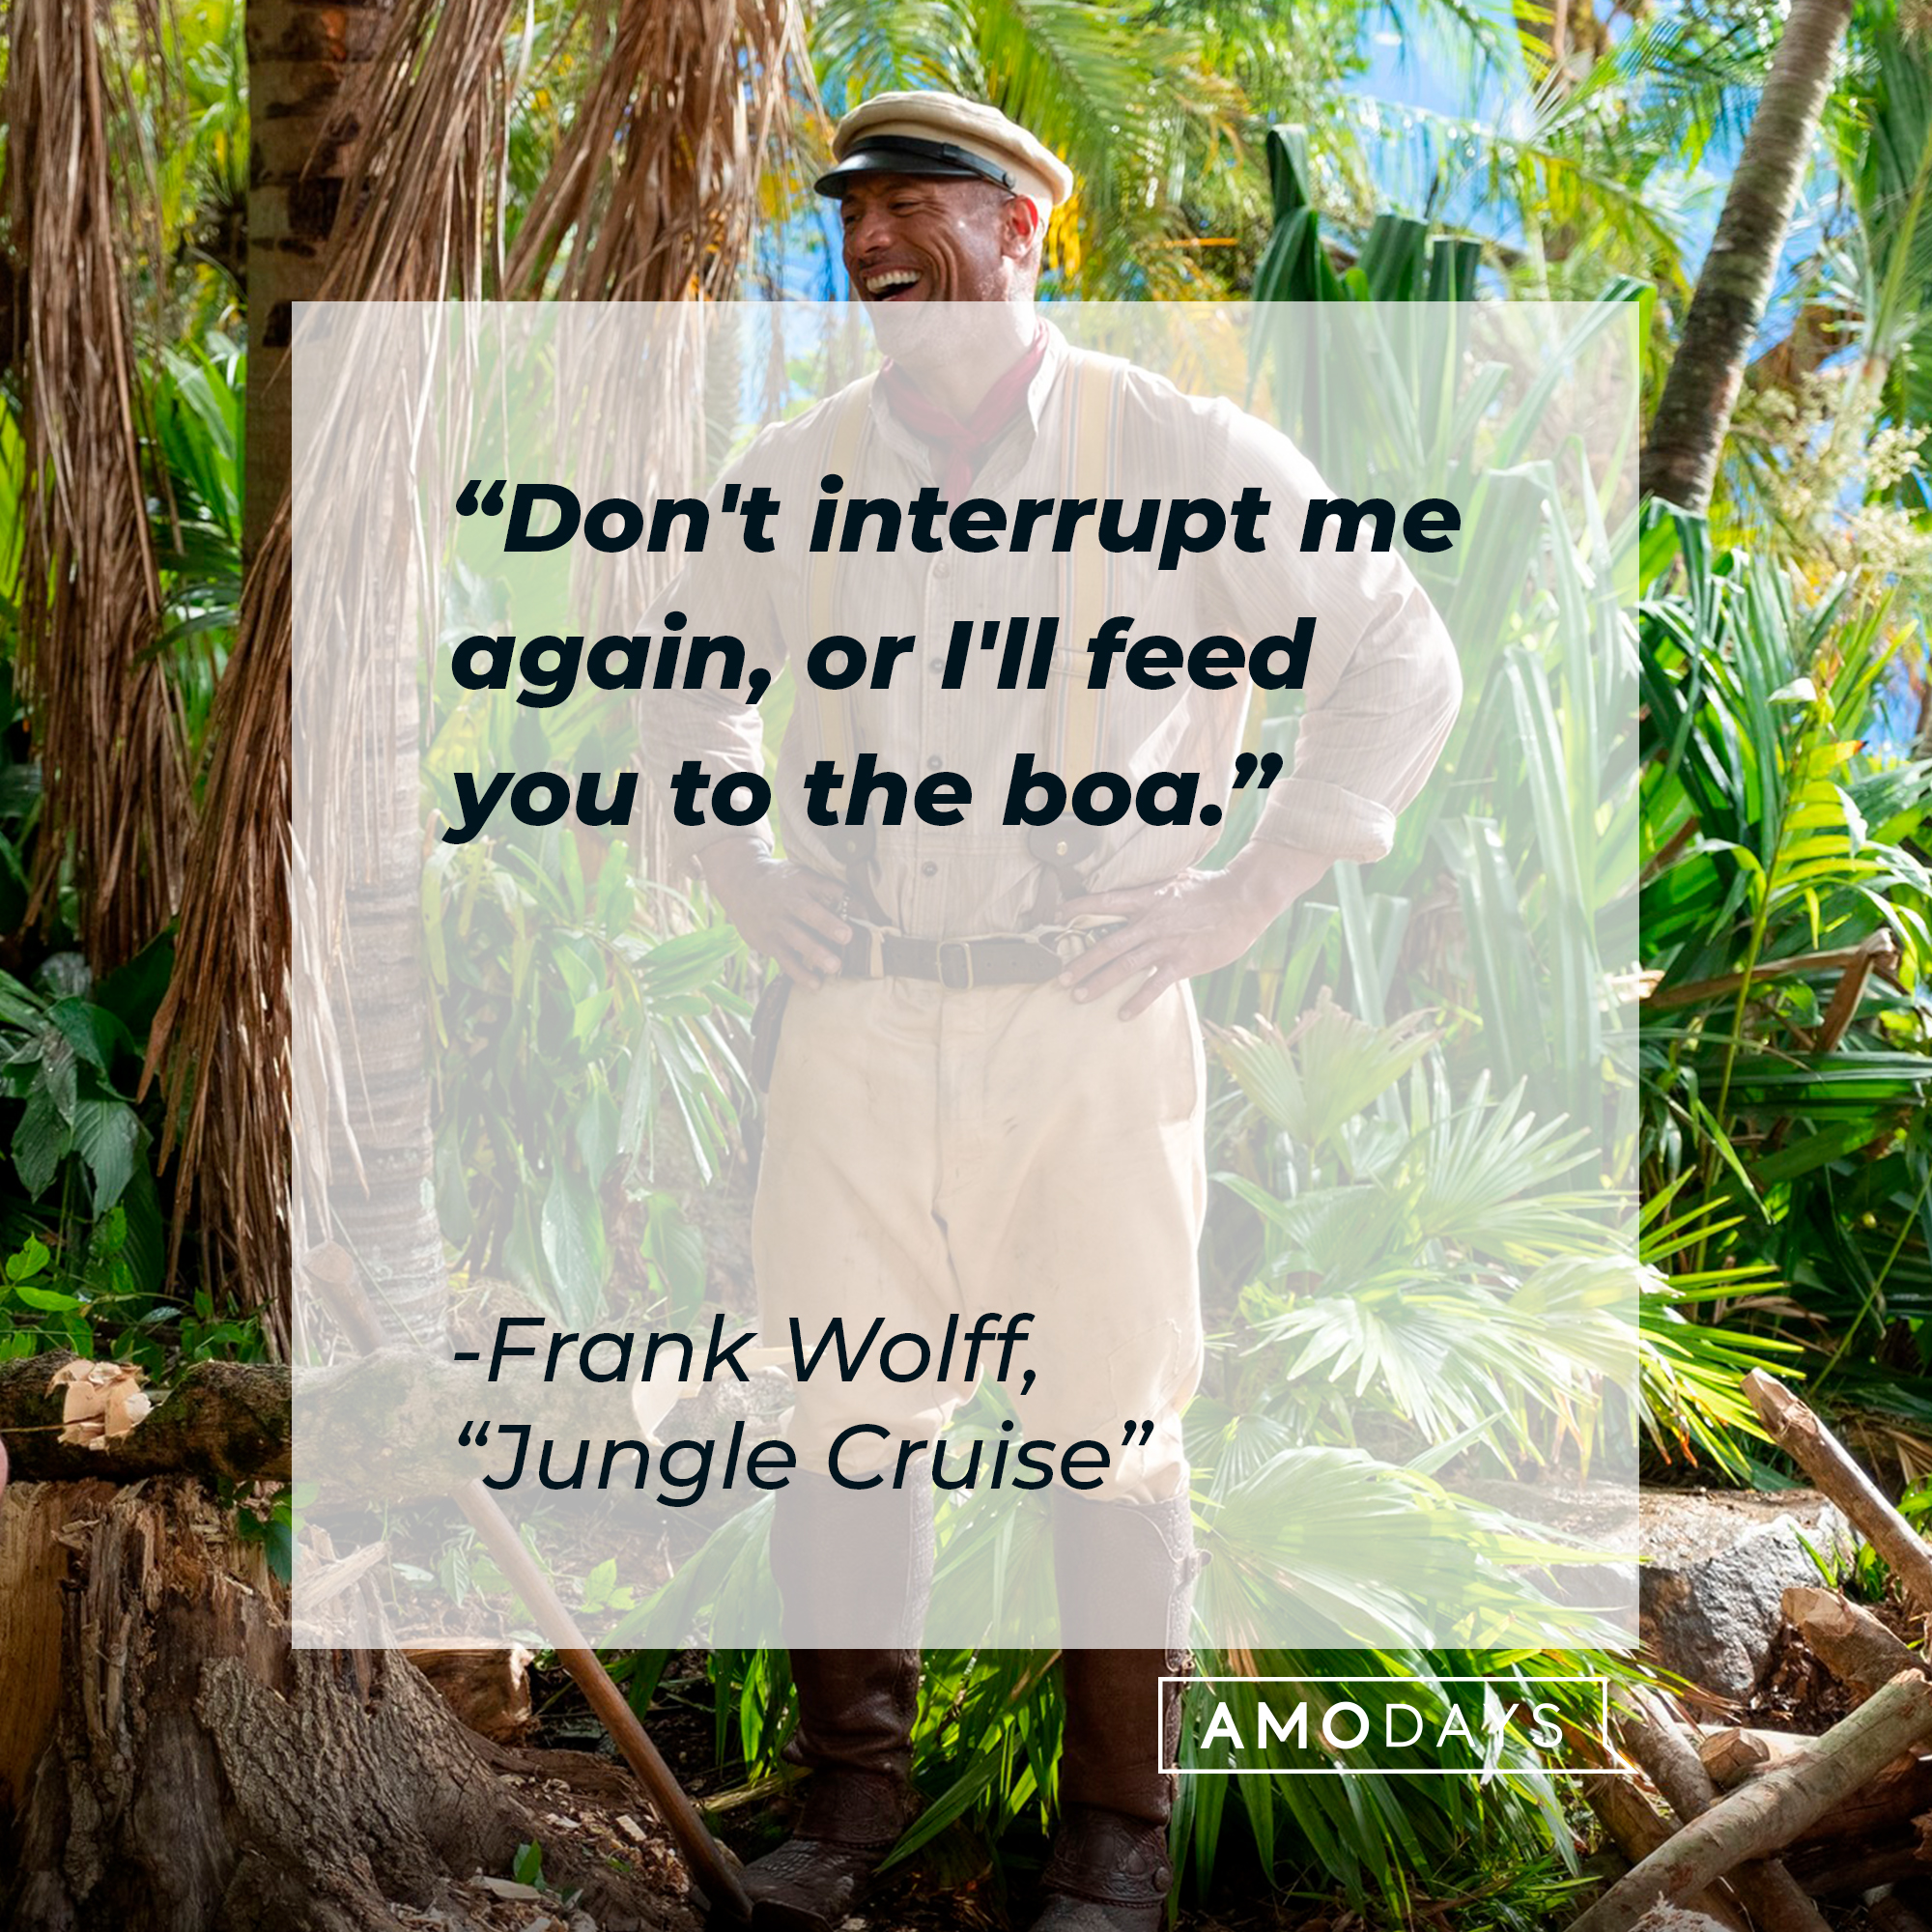 Frank Wolff’s quote: "Don't interrupt me again, or I'll feed you to the boa." | Image: facebook.com/JungleCruise